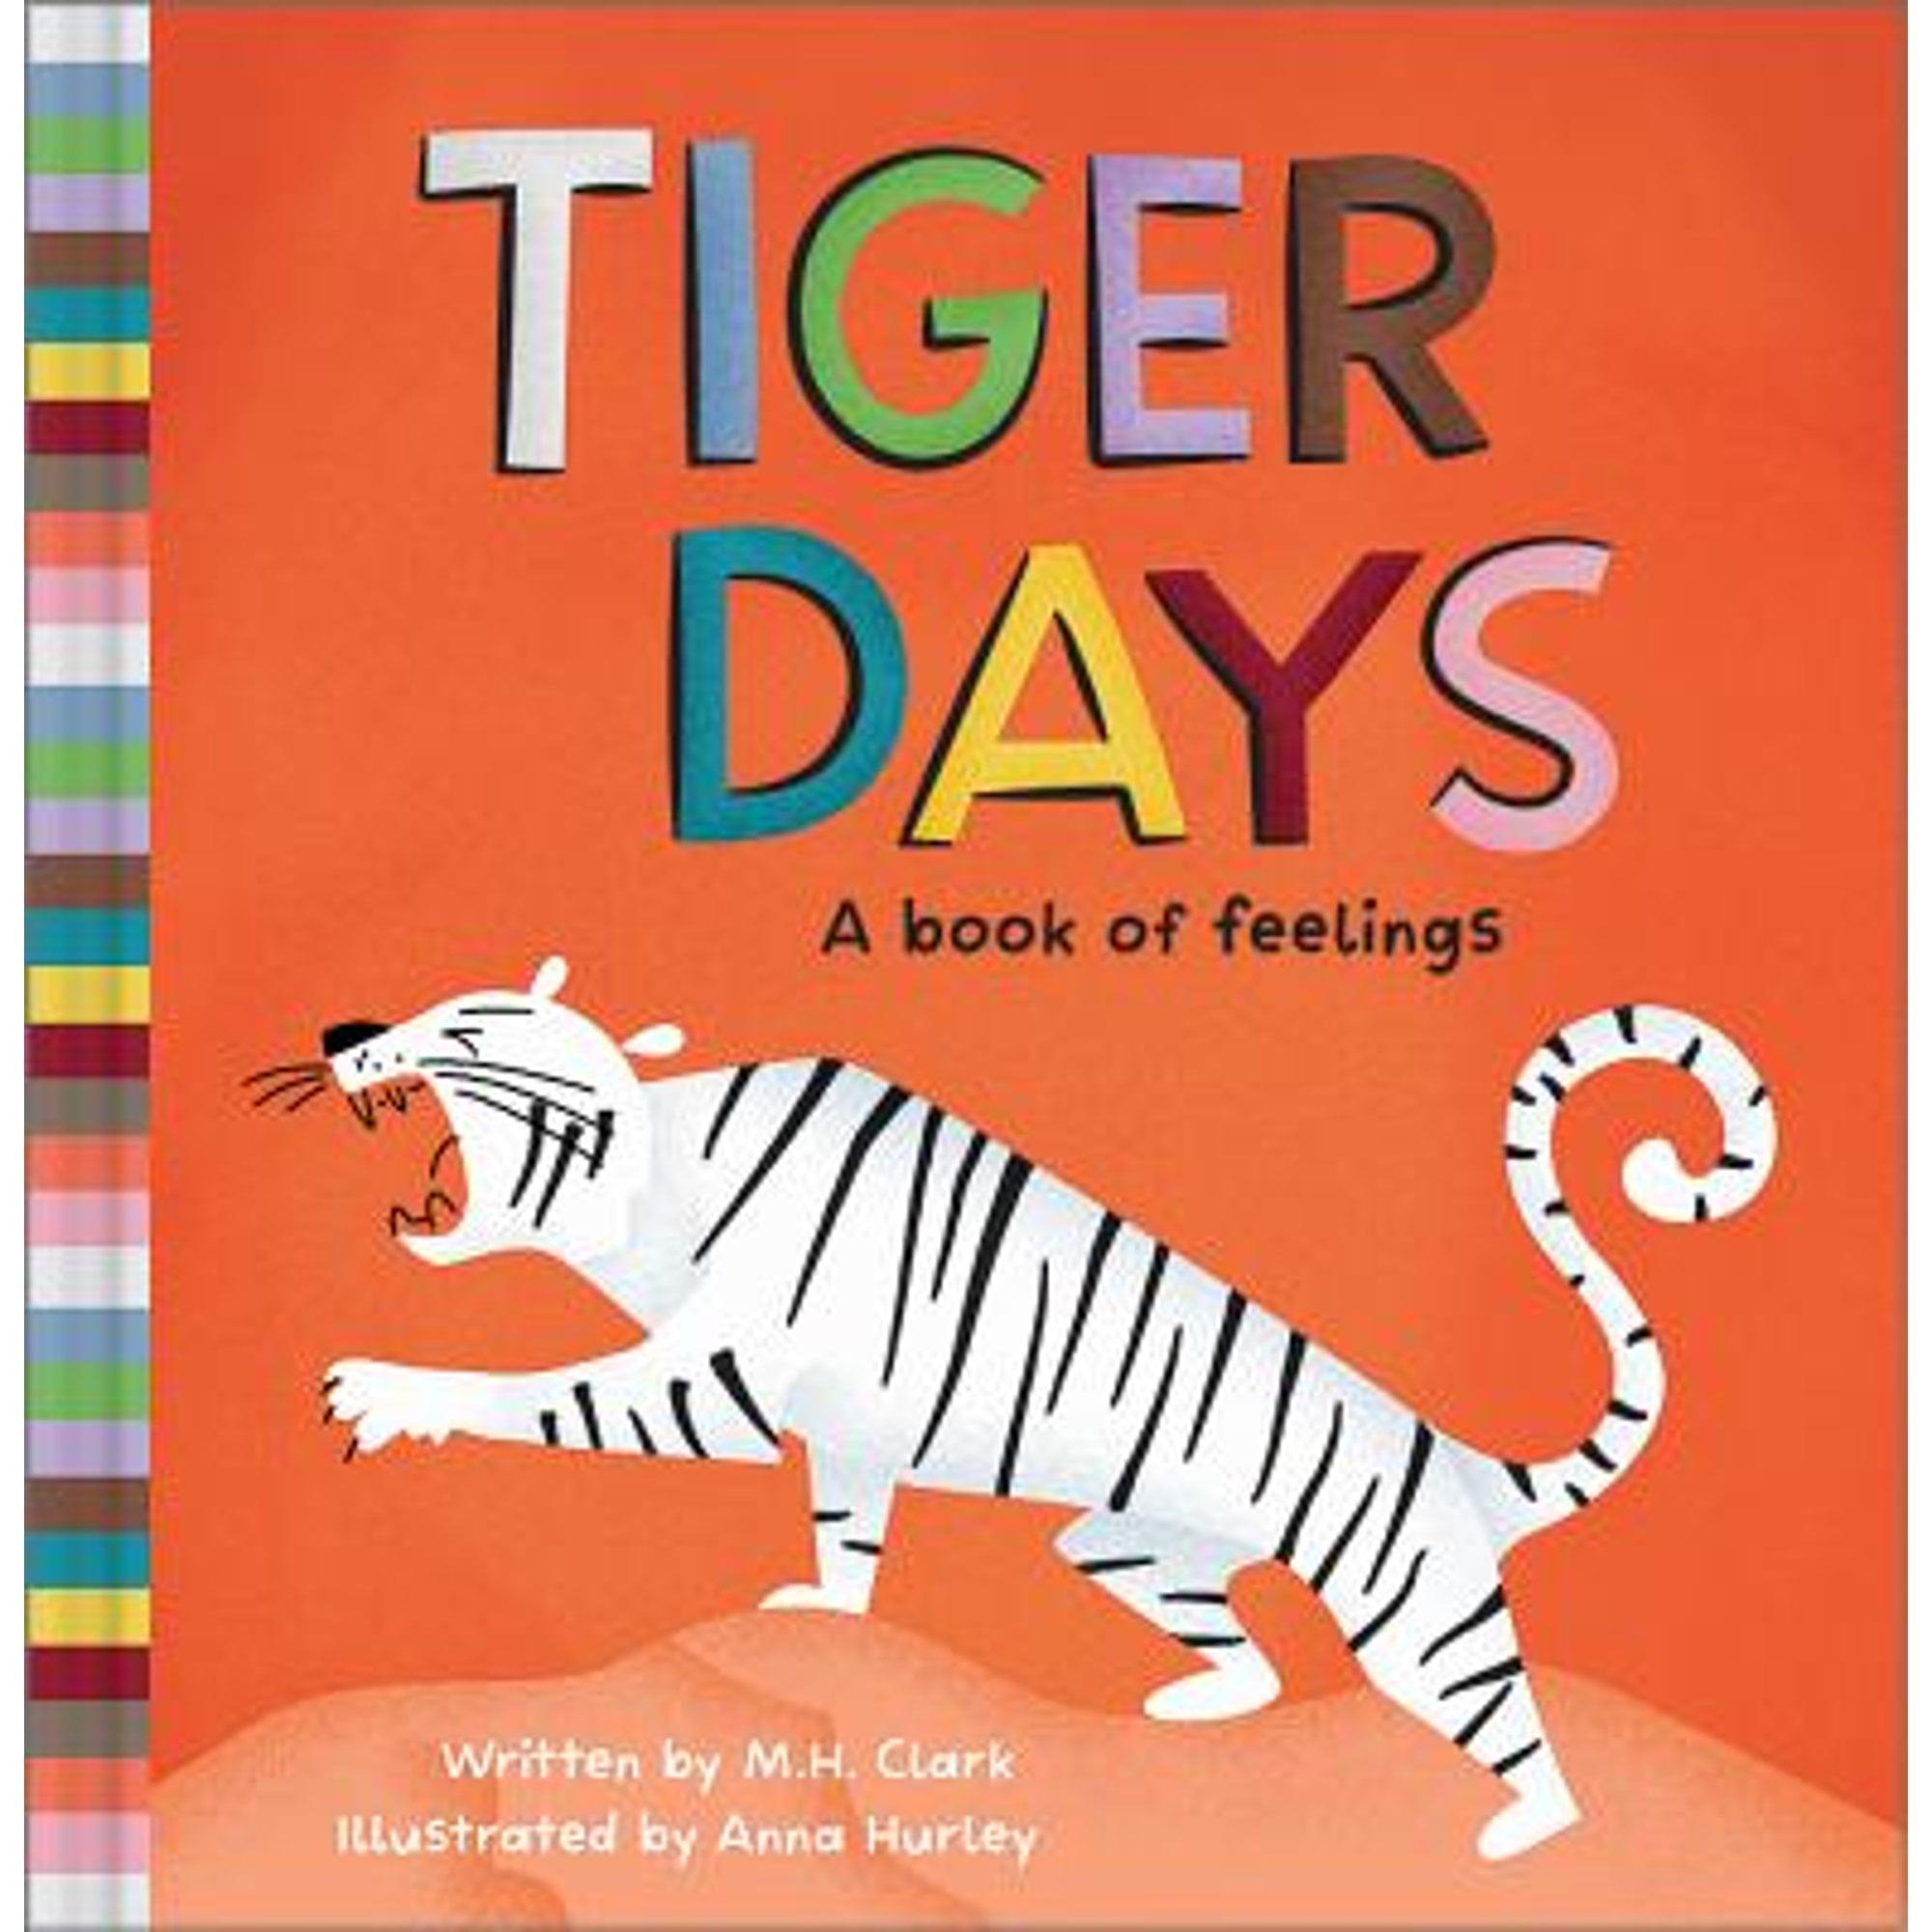 Pre-Owned Tiger Days (Hardcover) by M H Clark, Anna Hurly